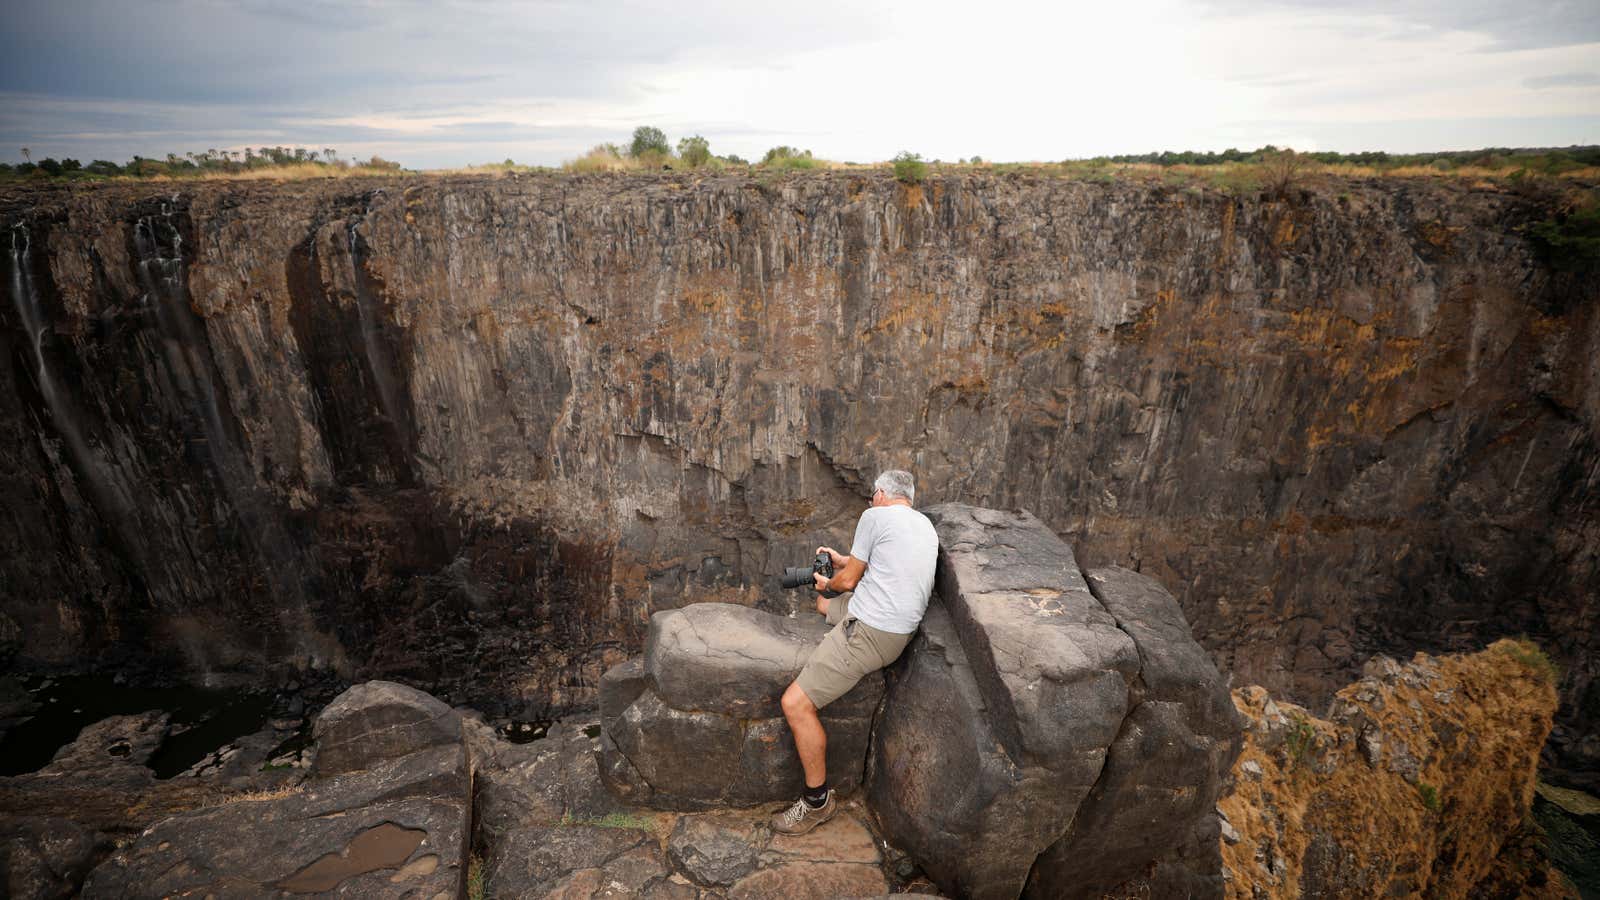 Visitors take pictures before dry cliffs following a prolonged drought at Victoria Falls, Zimbabwe, Dec. 4, 2019.